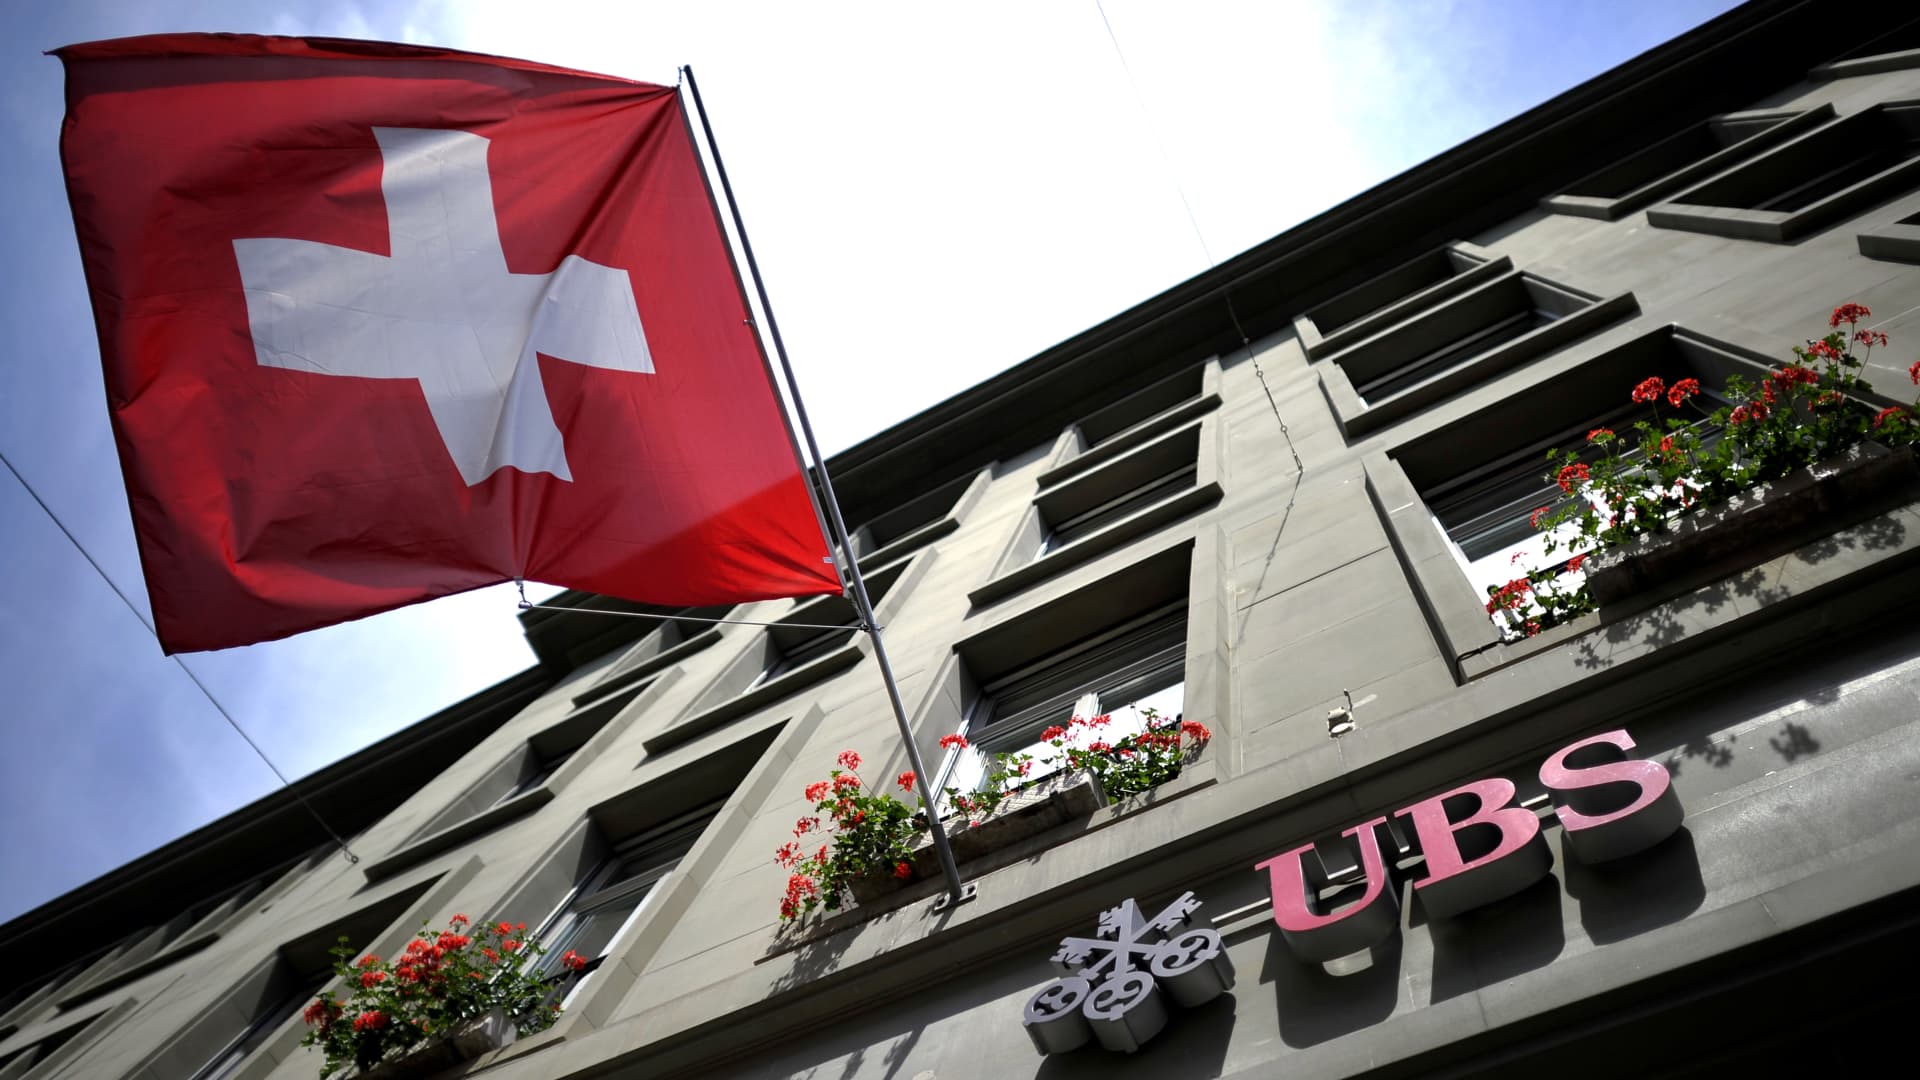 ‘A financial banana republic’: UBS-Credit Suisse deal puts Switzerland’s reputation on the line